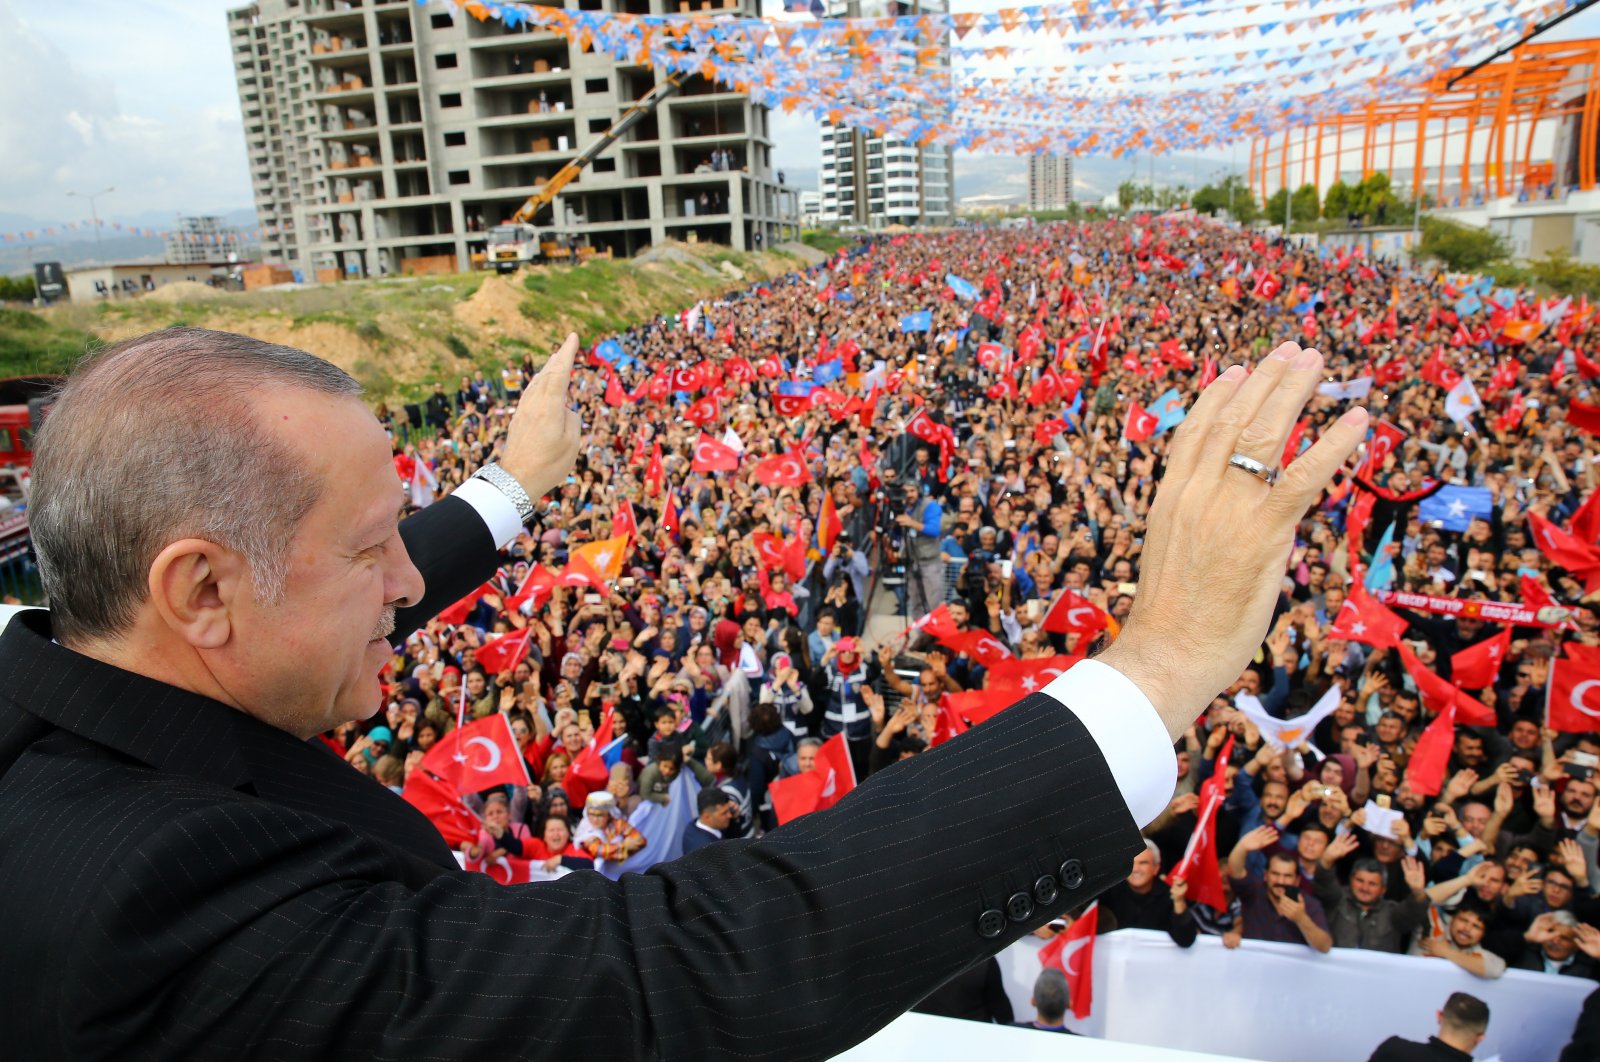 President Recep Tayyip Erdoğan waves to the crowd during the sixth ordinary congress of the AK Party in Mersin, Turkey, March 10, 2018. (Courtesy of the Turkish Presidency)